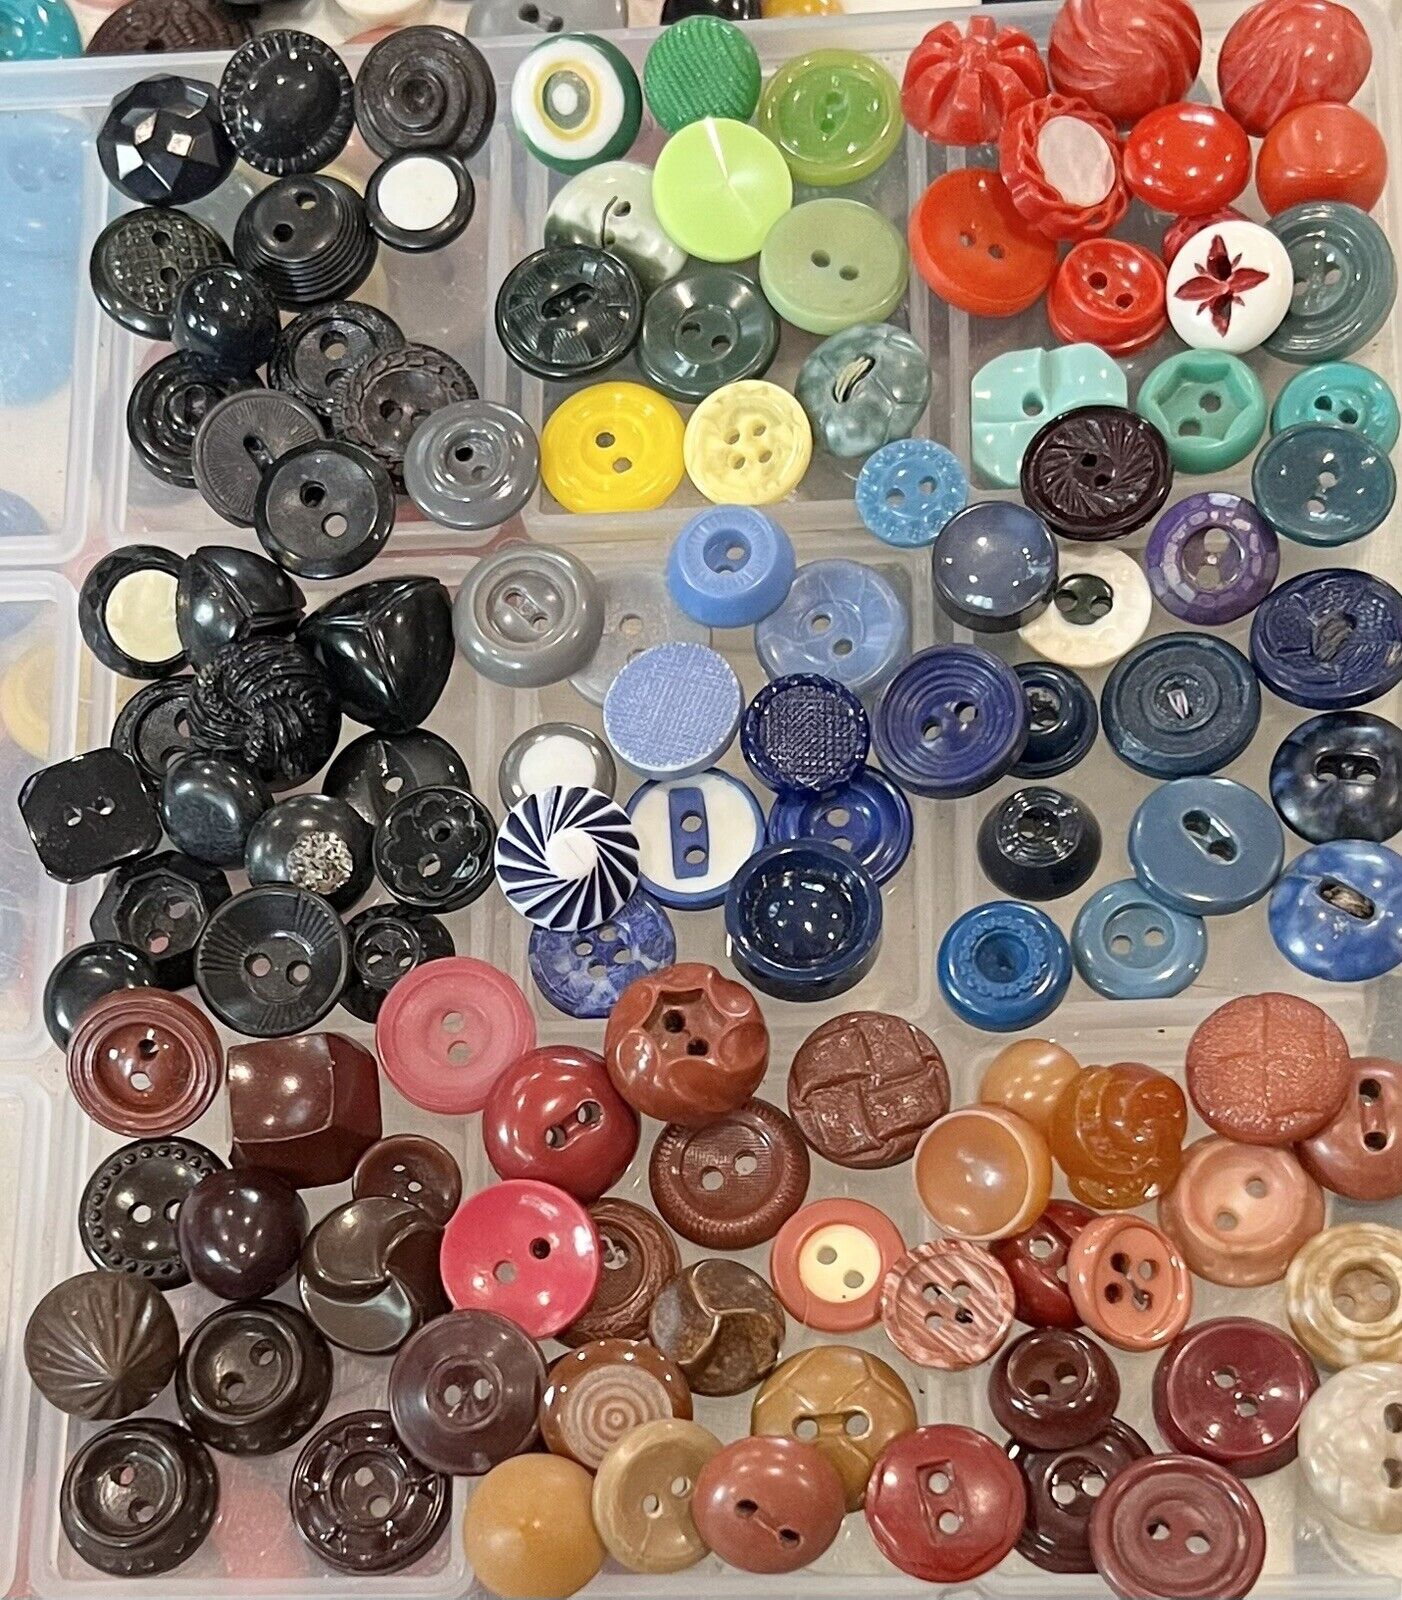 Vintage Colorful Mixed Variety 122 Small Plastics Novelty Buttons Lot